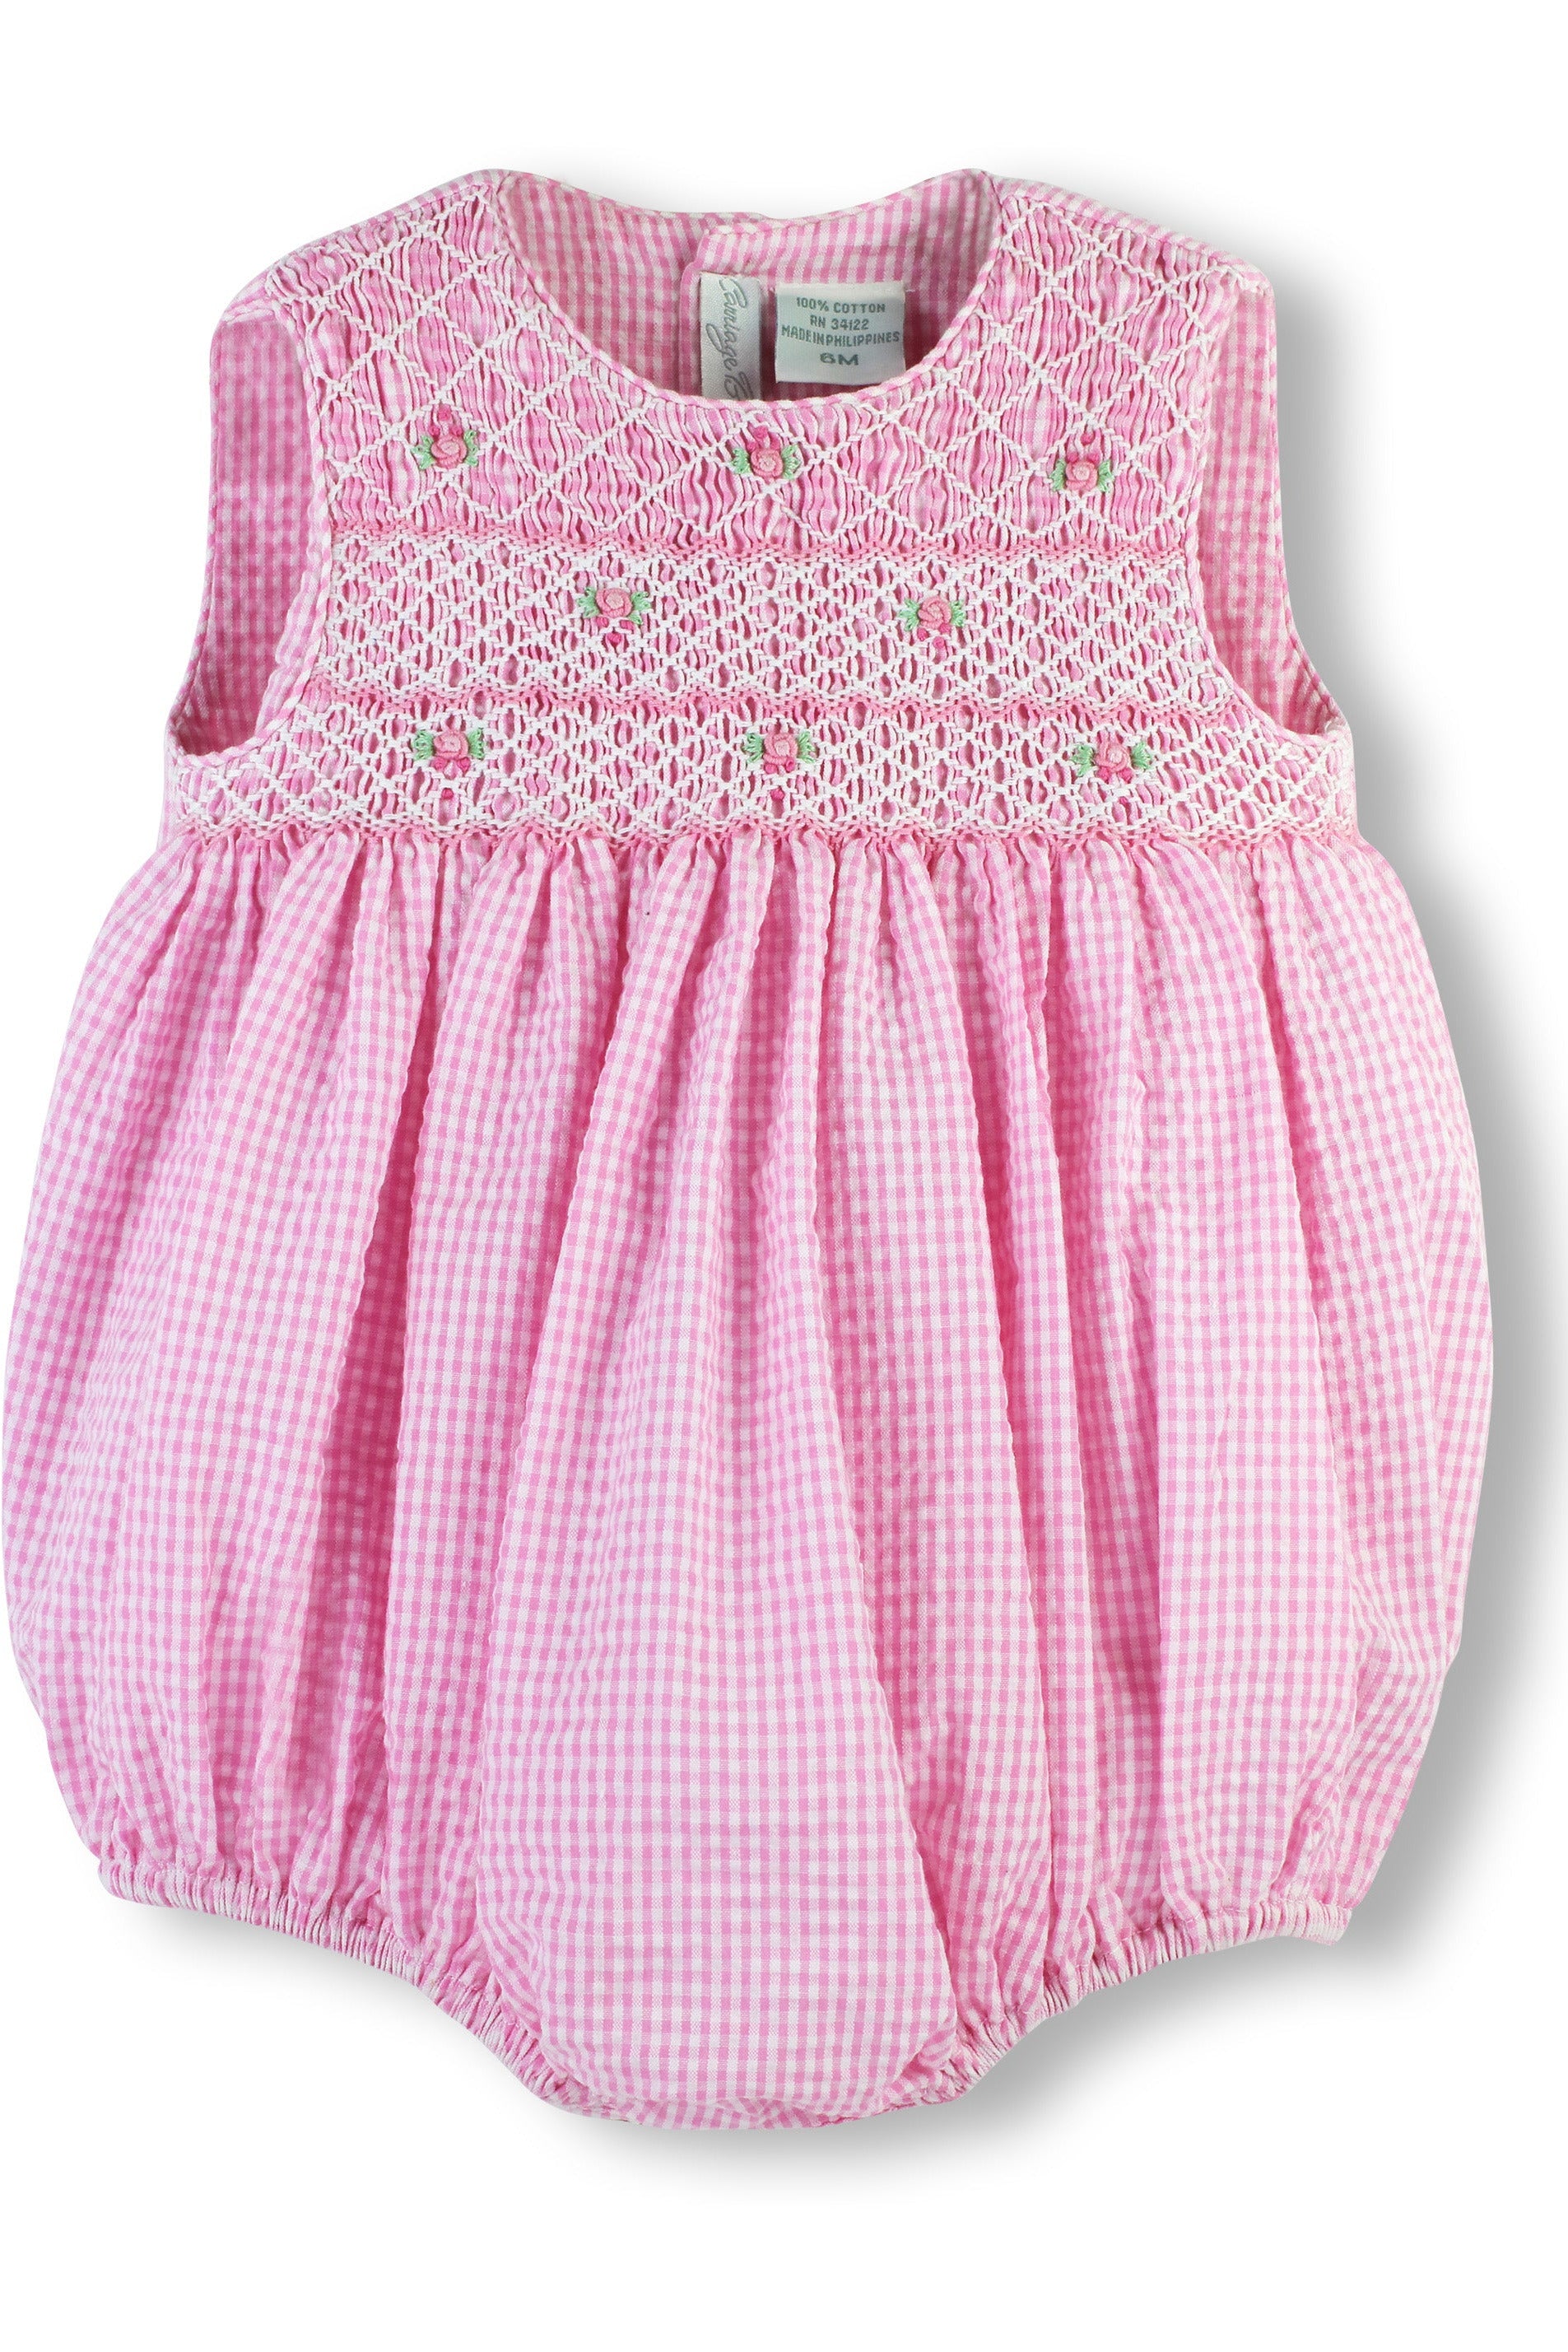 Ruffle Diaper Cover, Pink – Simply Sweet Kids